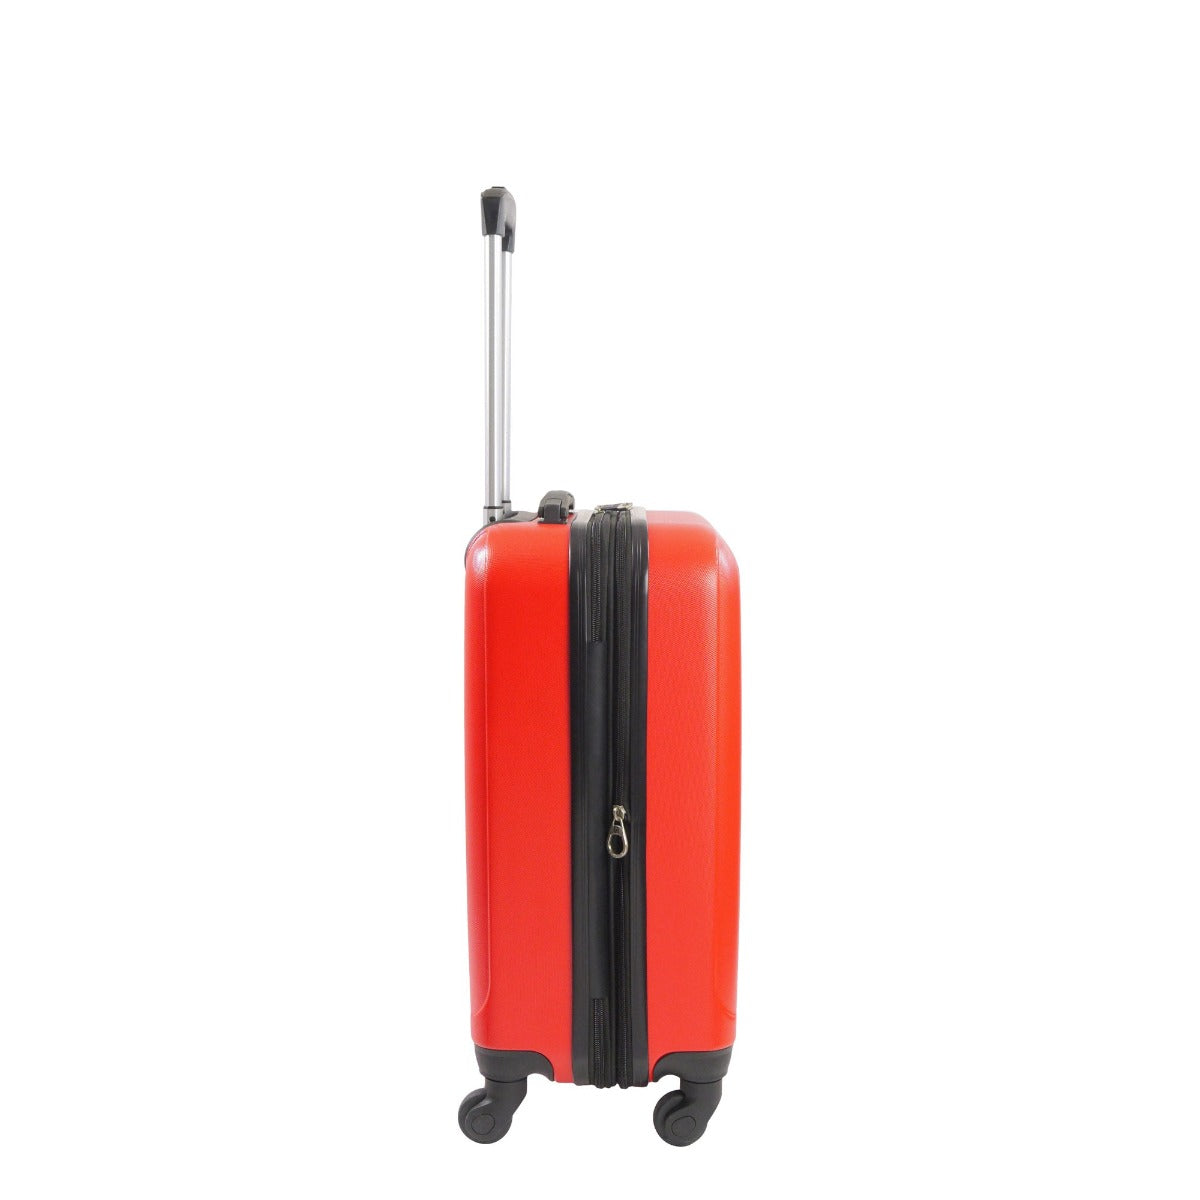 Pure 21-inch scratch resistant carry-on spinner suitcase affordable luggage in red